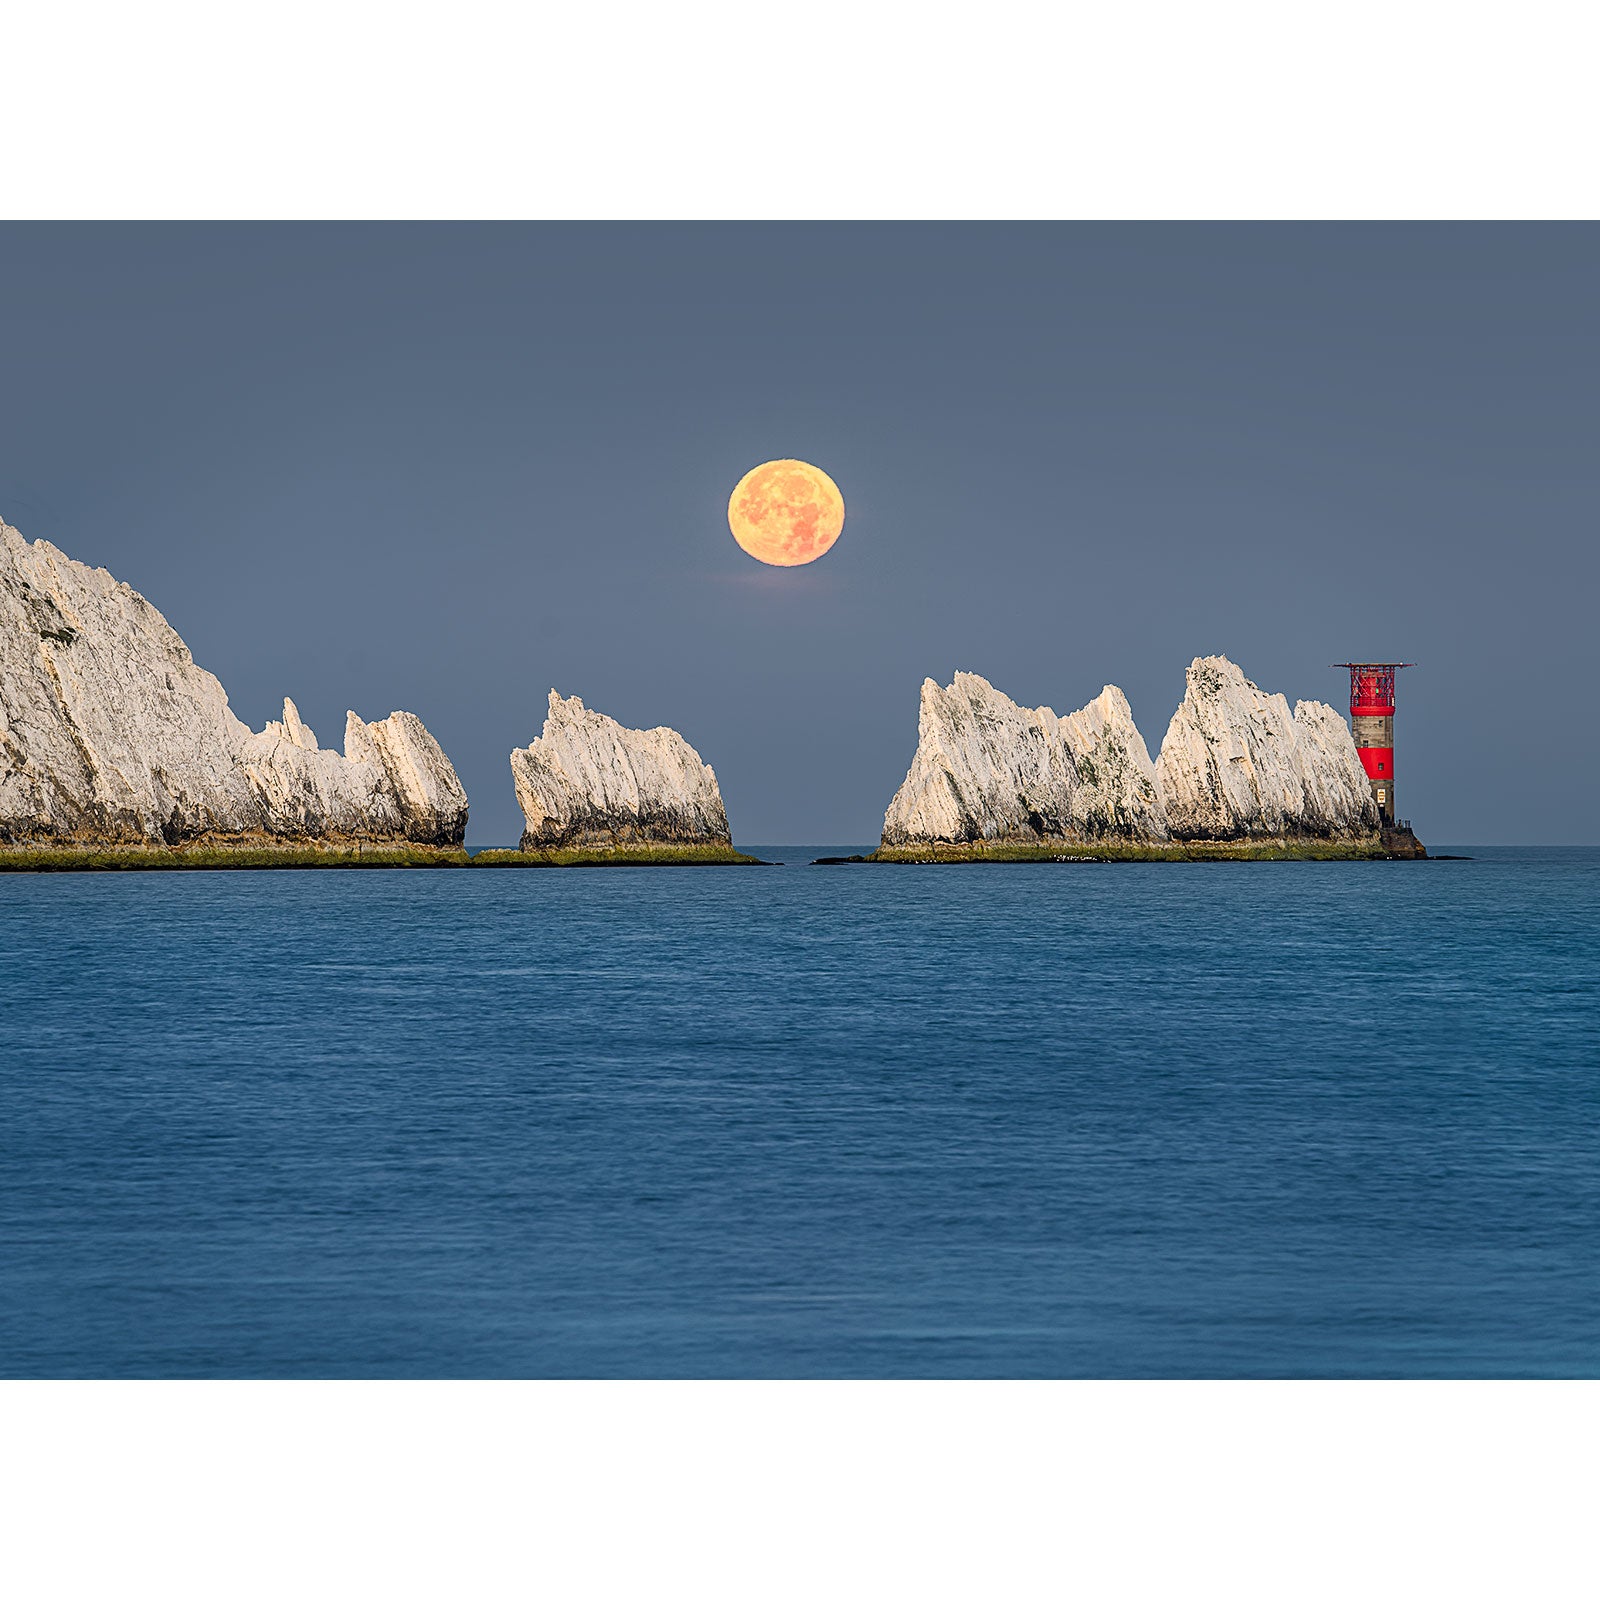 Full Moonset over The Needles rising over a calm sea with a lighthouse and white cliffs on the Wight horizon, captured by Available Light Photography.